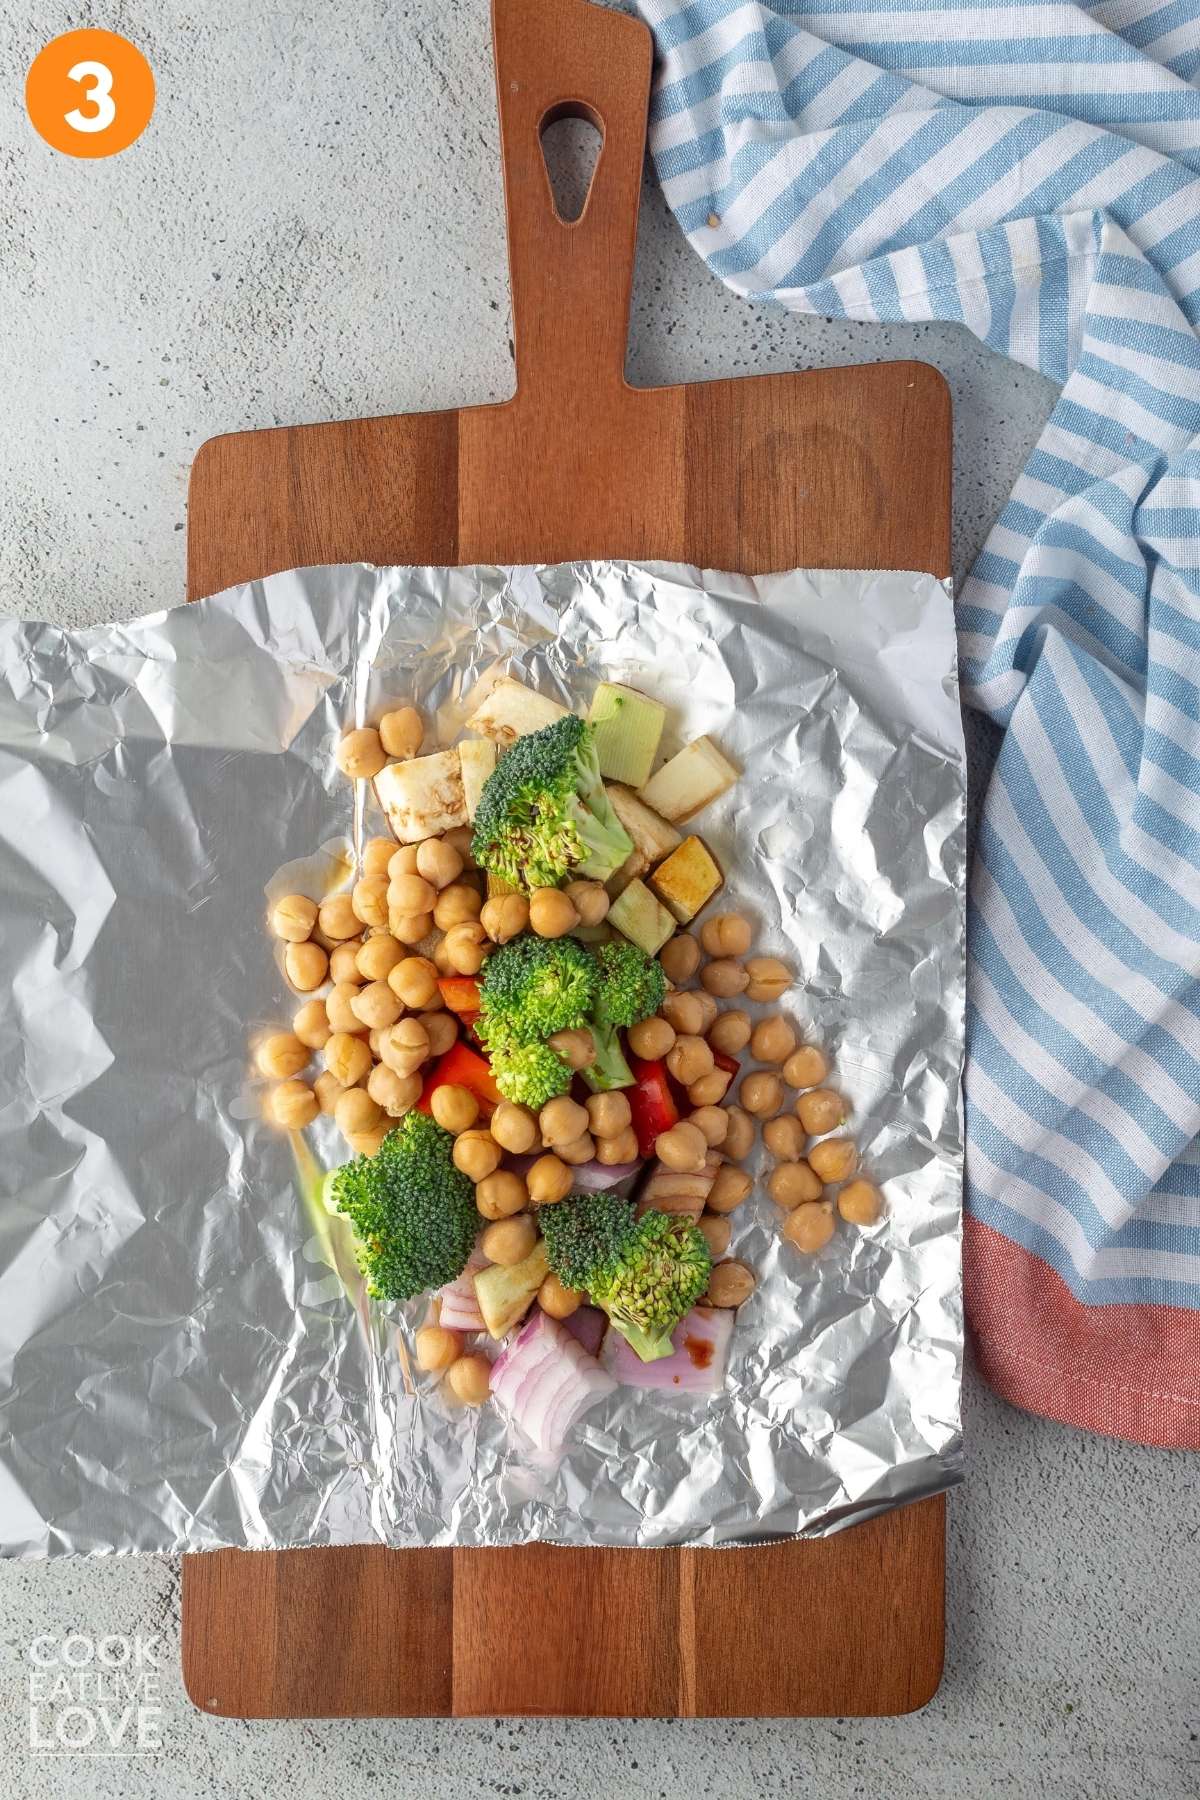 Chickpeas added to veggies on top of sheet of foil.